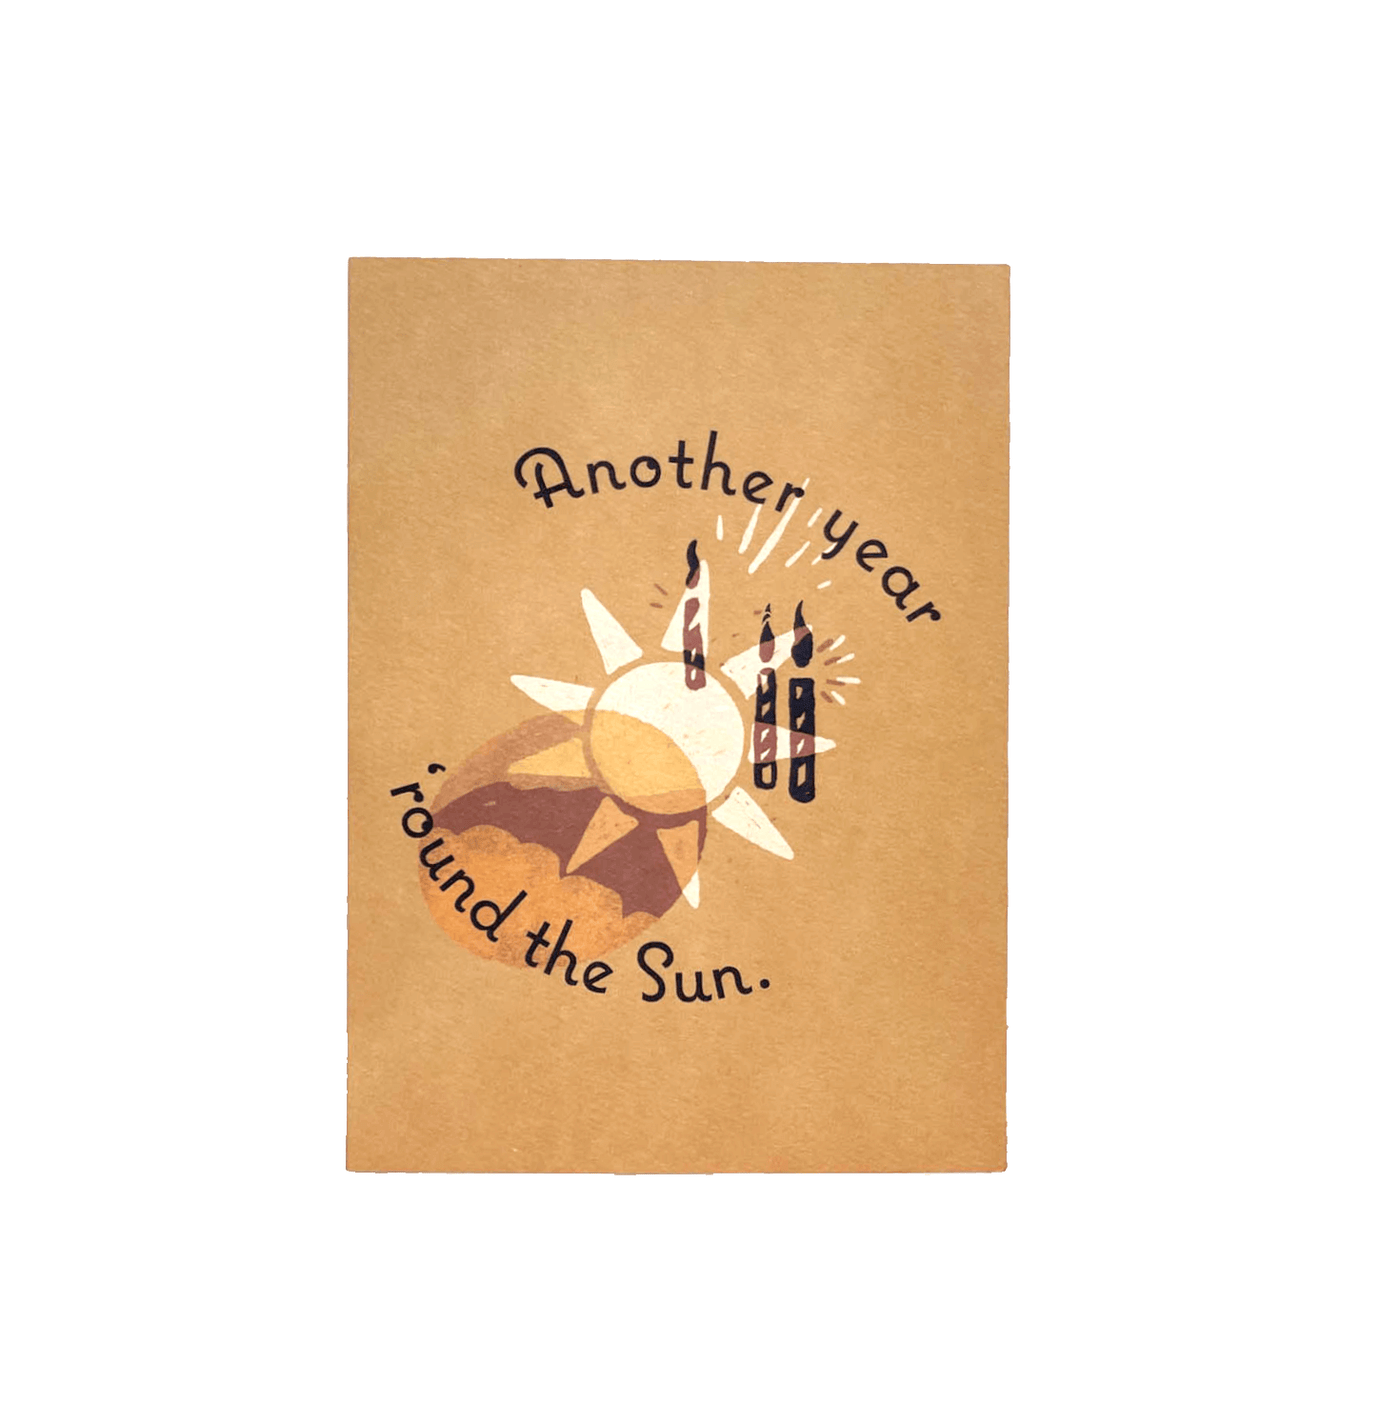 solar return greeting birthday card that reads "another year 'round the sun" with a sun illustration on the cover 